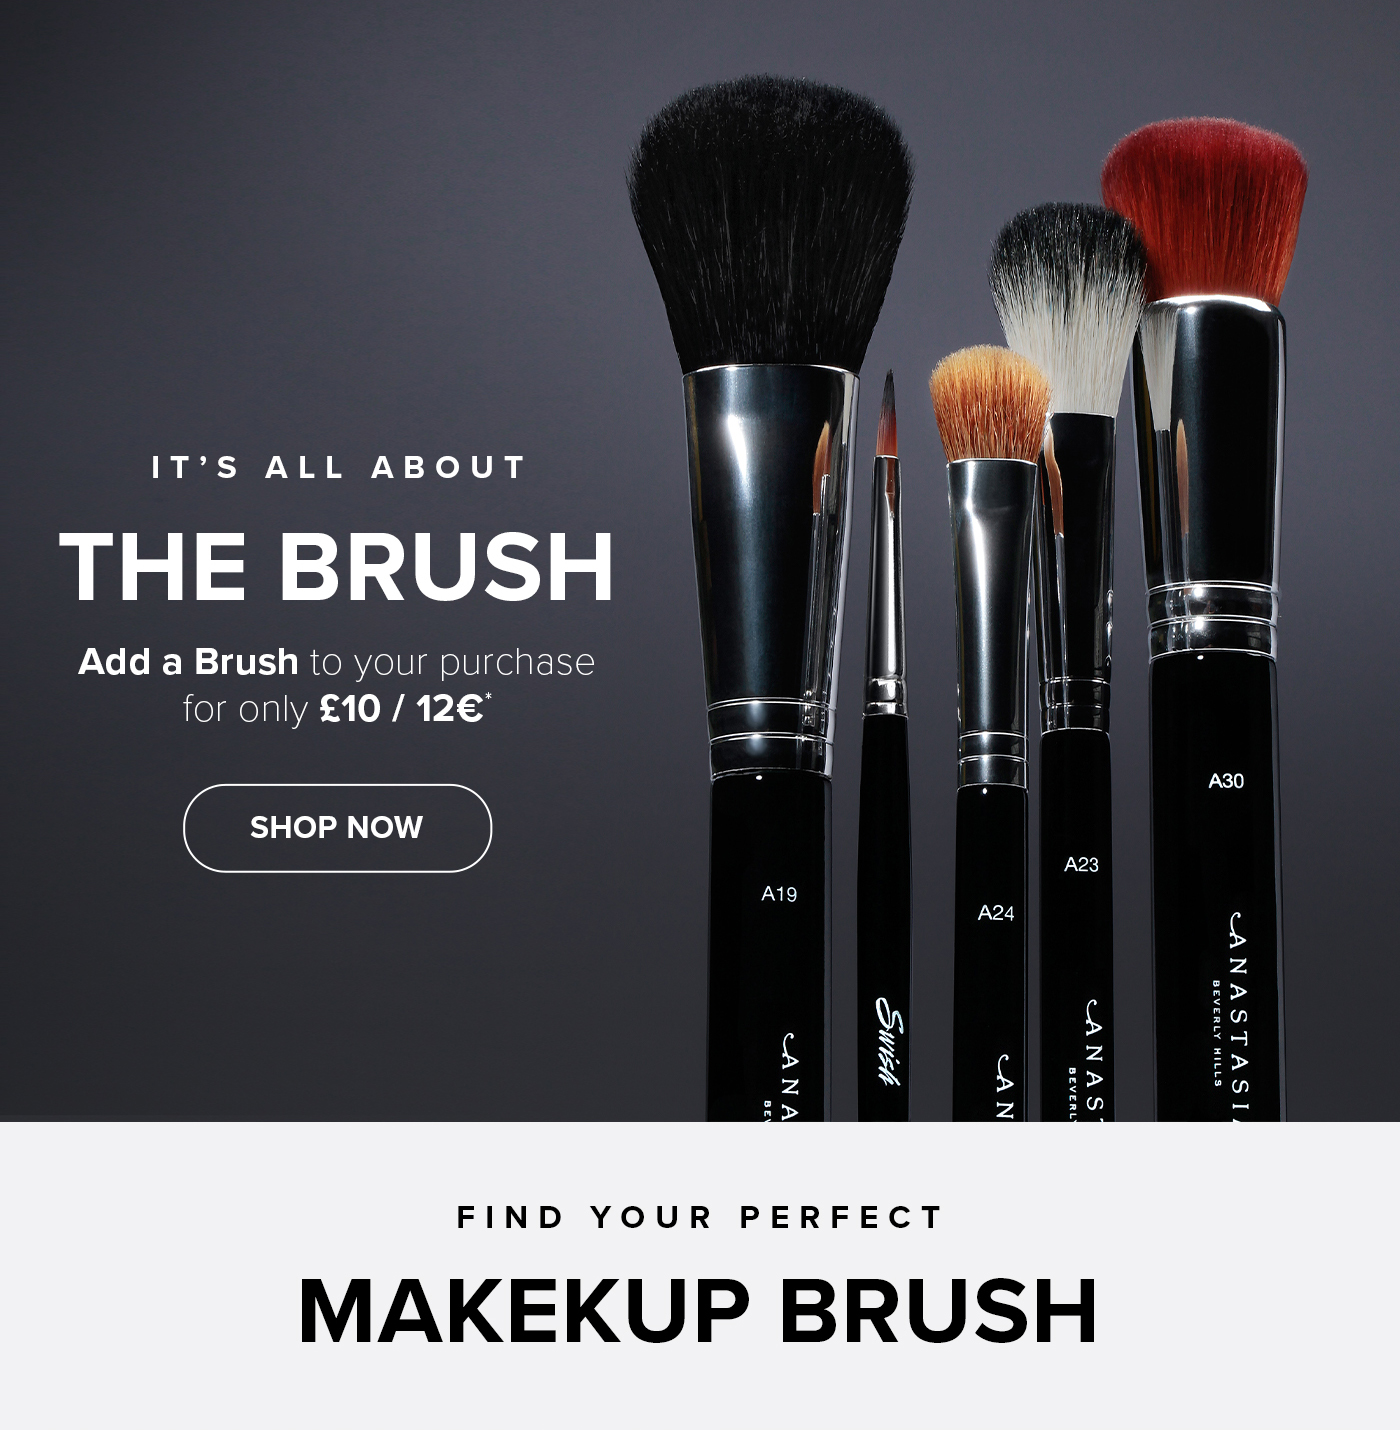 Add a Brush to your purchase for only ?10/12?* - Shop Now